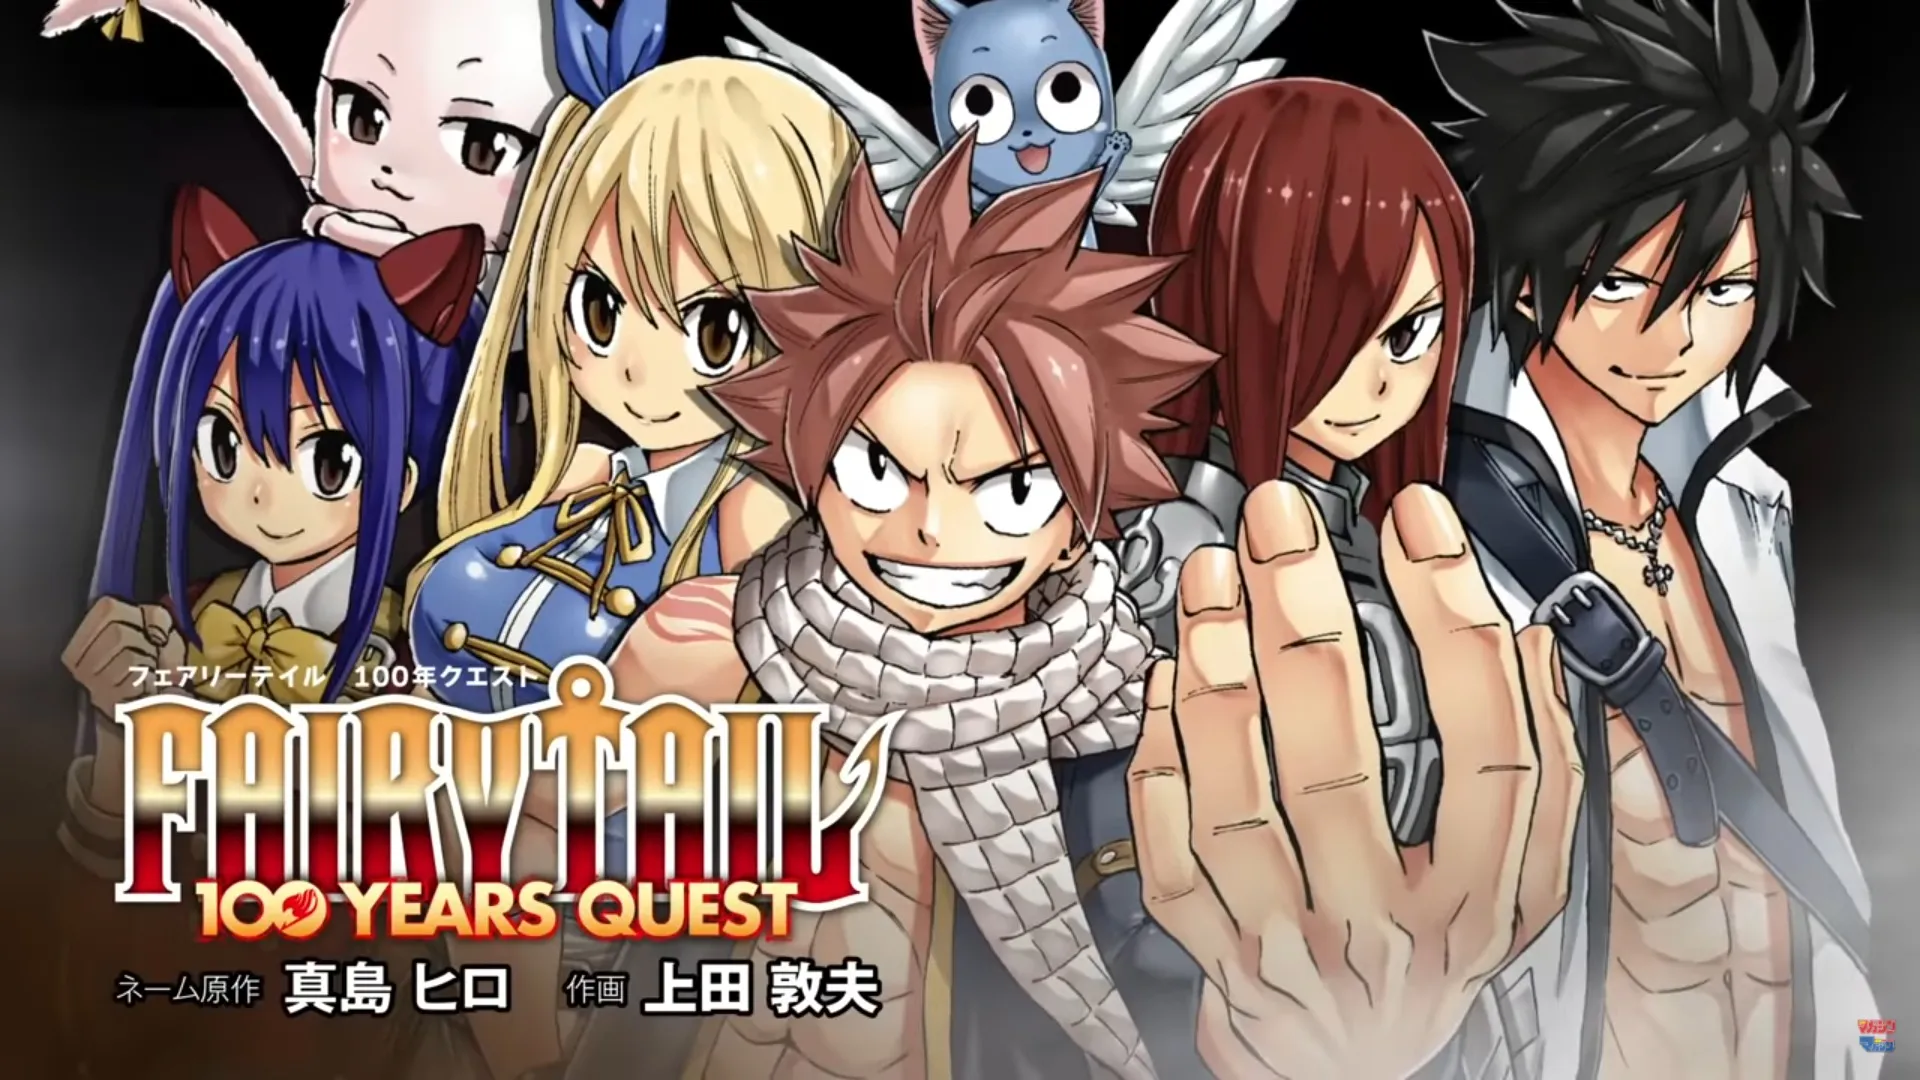 Tsumi 🇵🇸 on X: • NEWS • Fairy Tail: 100 Years Quest Anime will have an  Official Announcement Really soon. Very high possibility right after Edens  Zero Season 2 finishes airing. Time